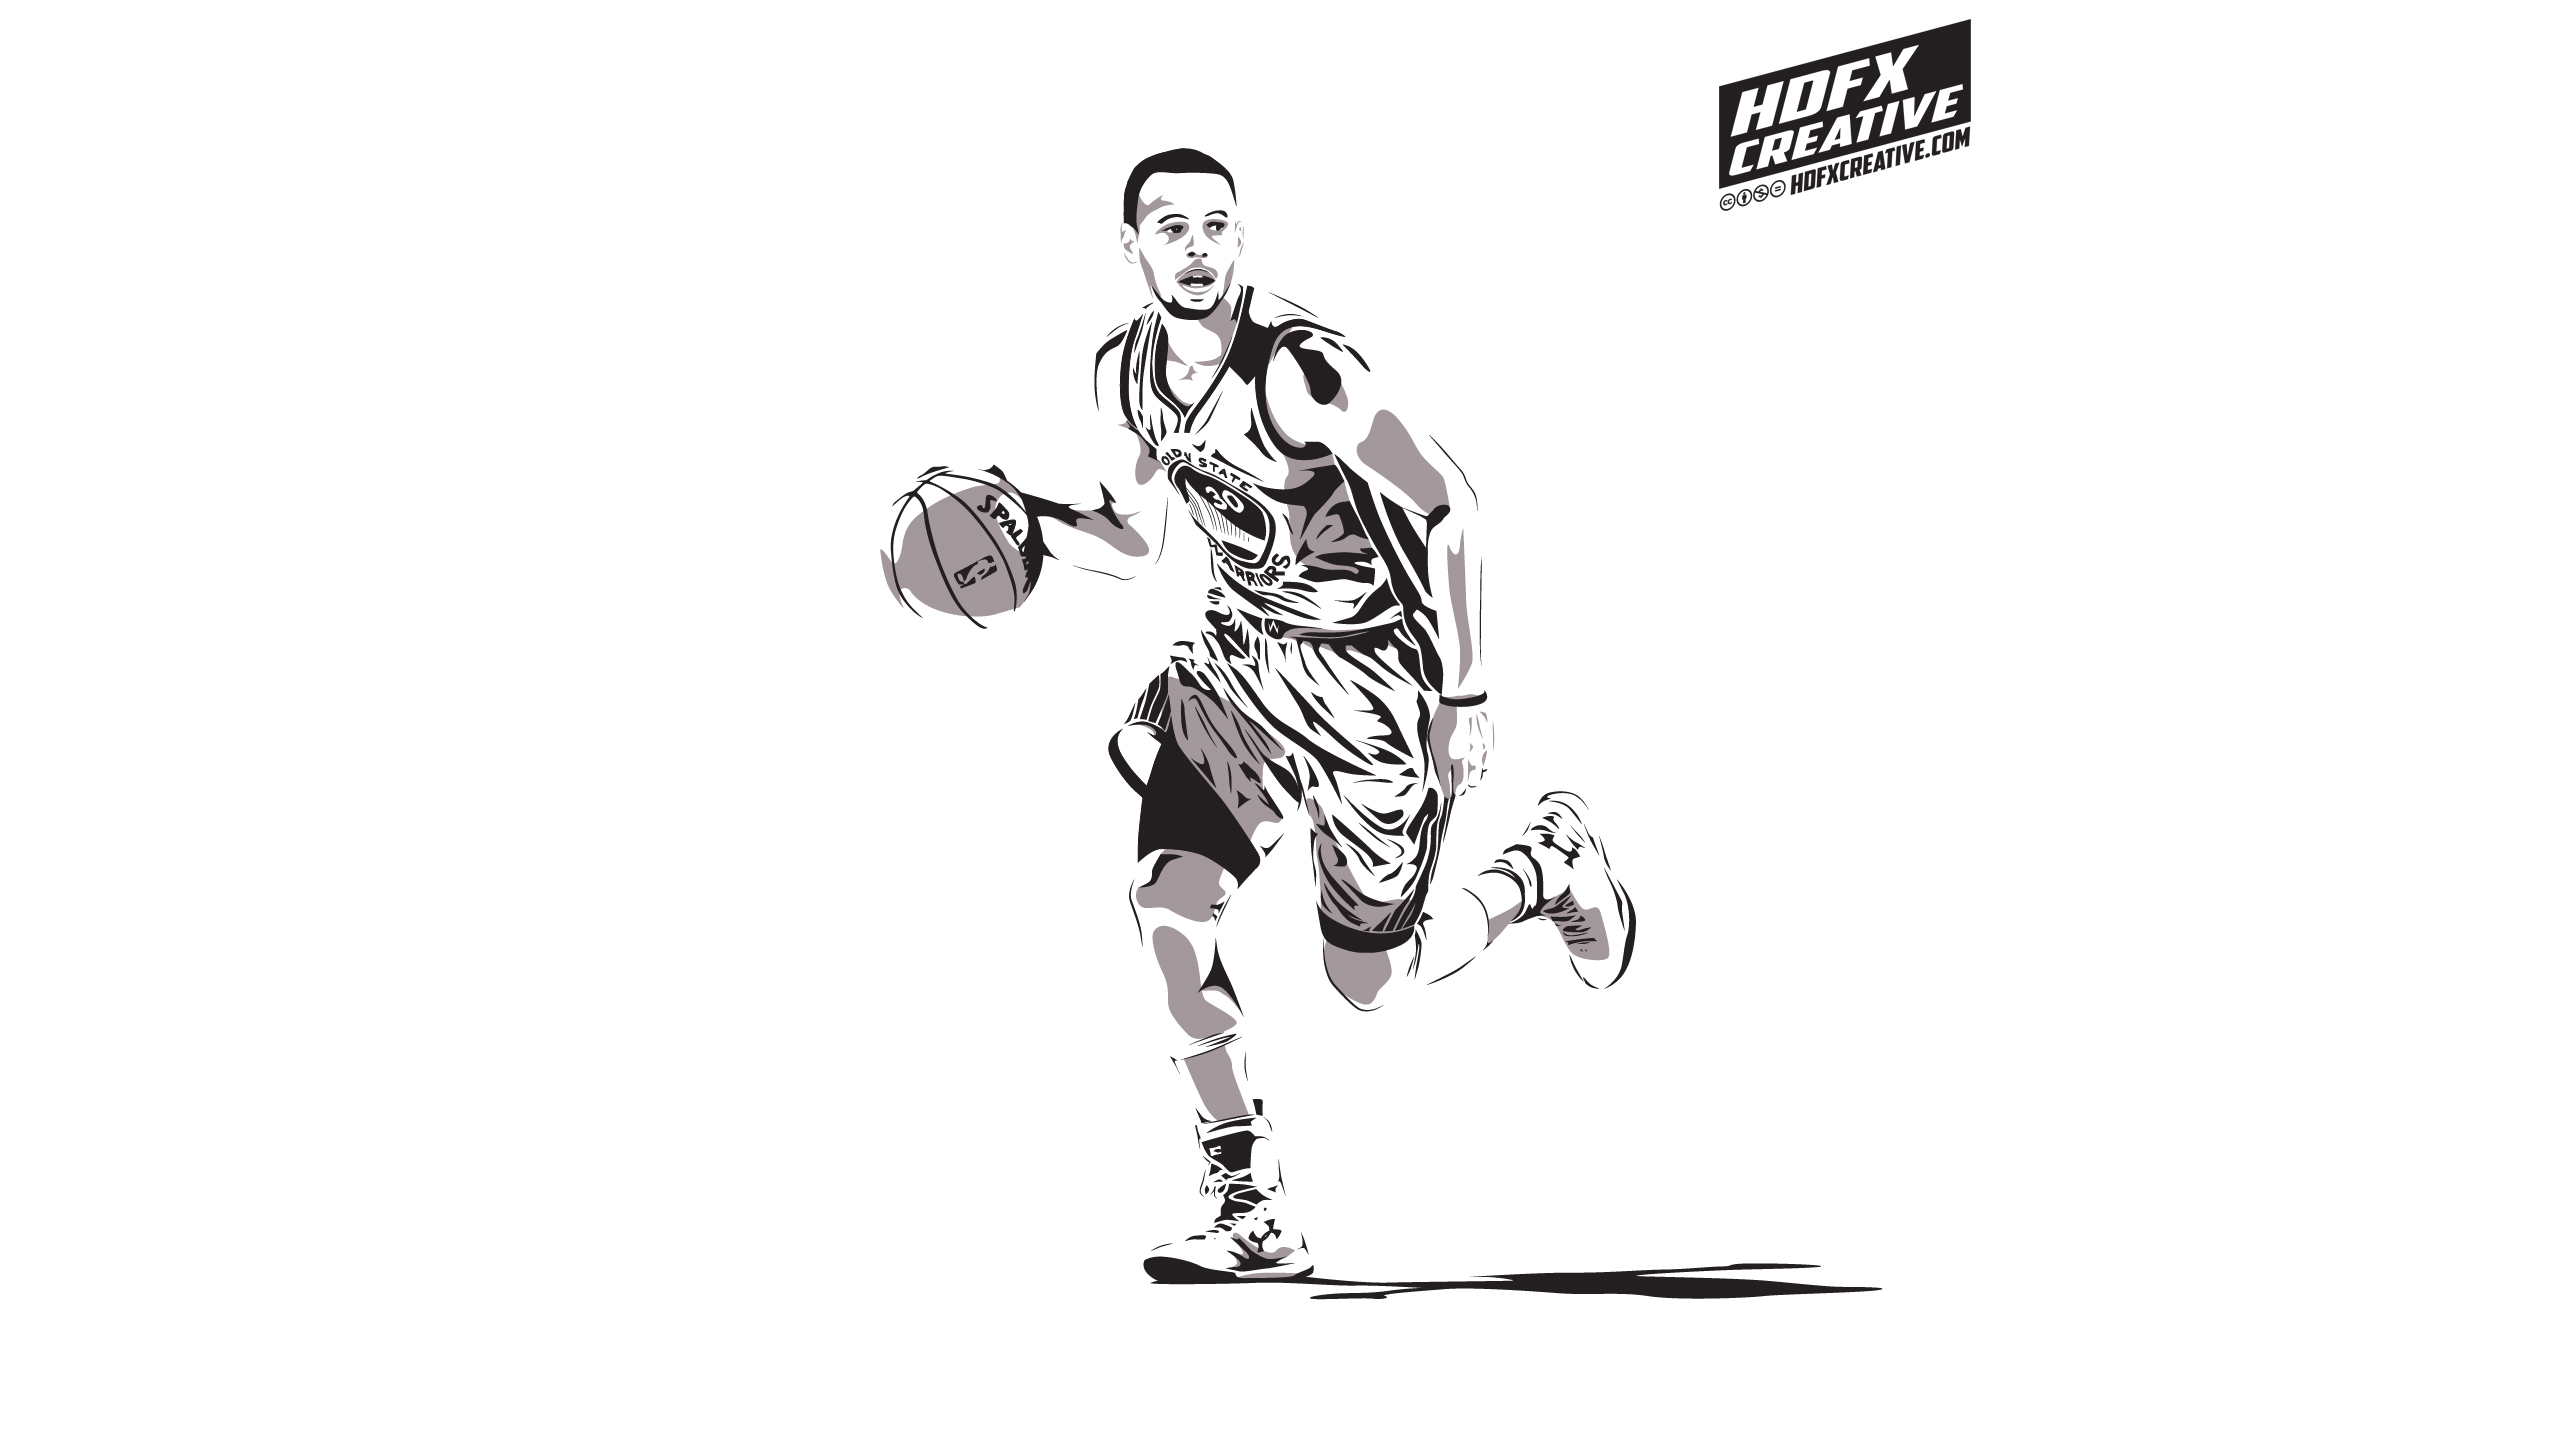 Steph Curry Wallpaper by IshaanMishra on DeviantArt